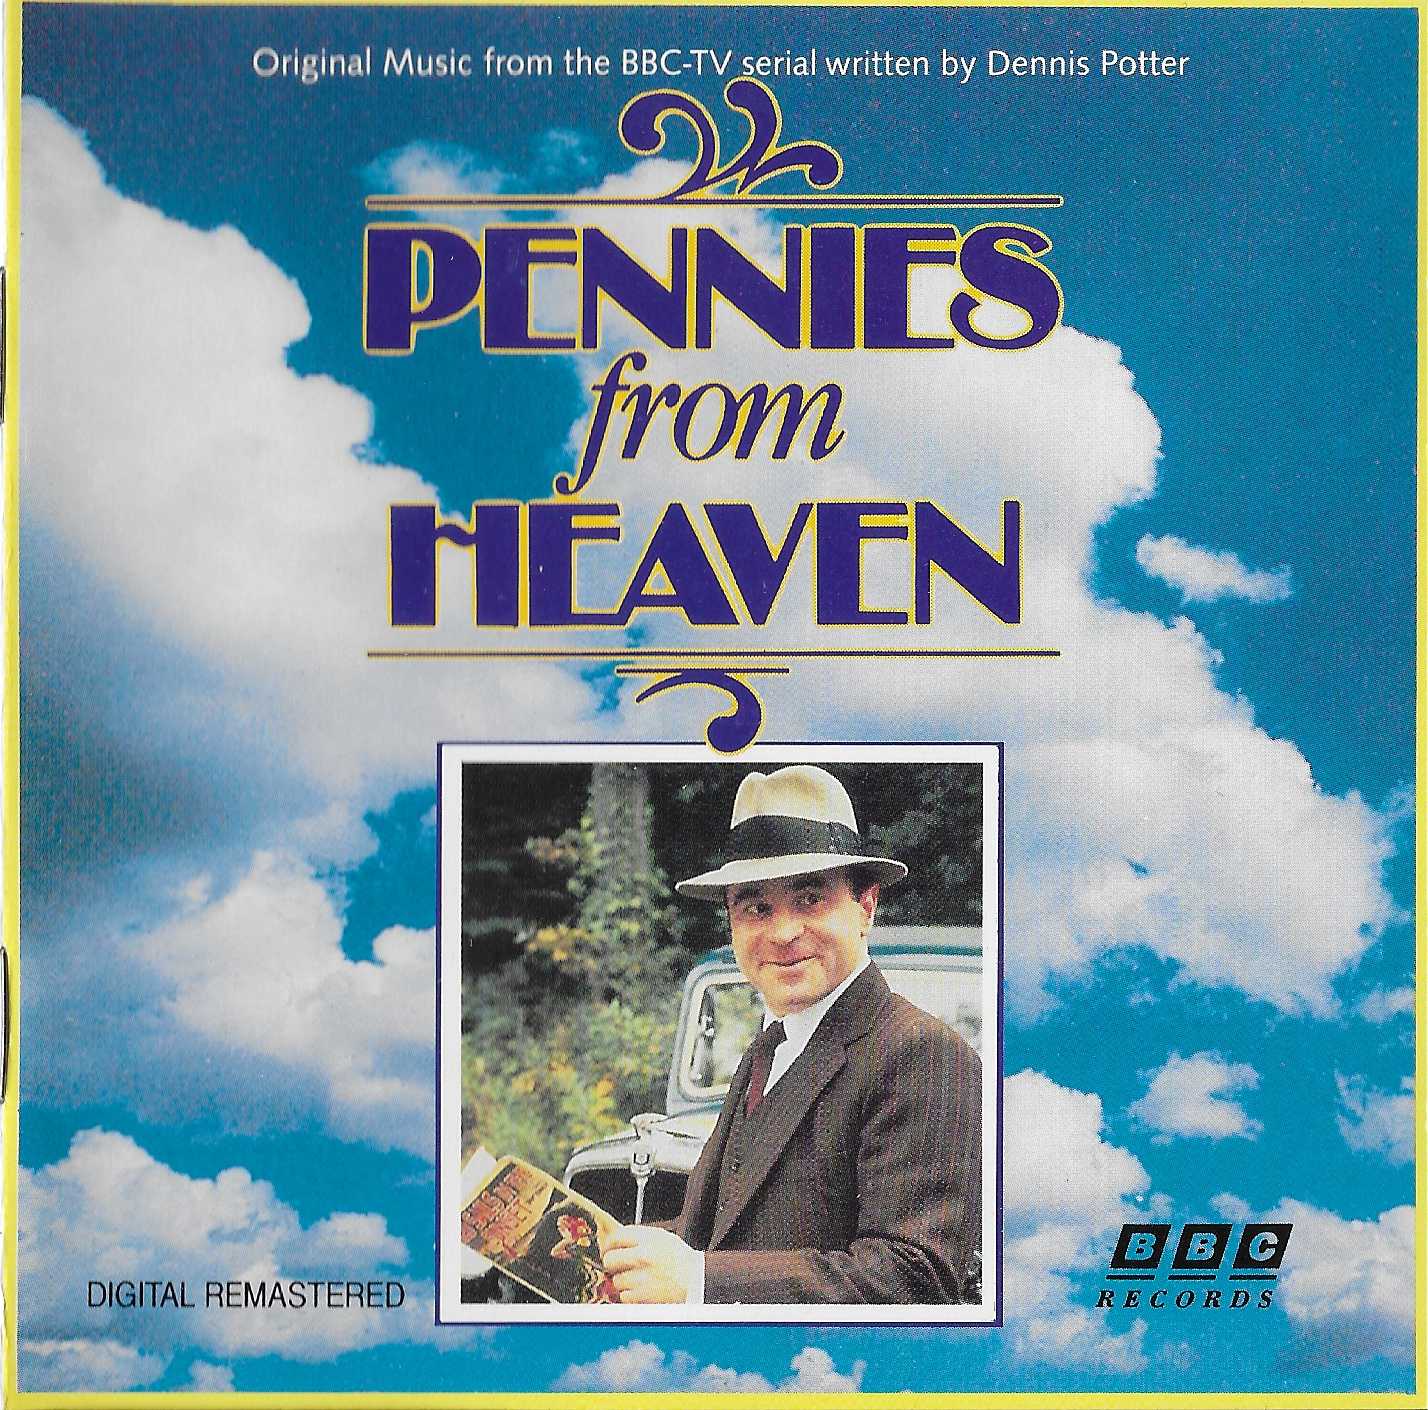 Picture of Pennies from Heaven by artist Various from the BBC cds - Records and Tapes library